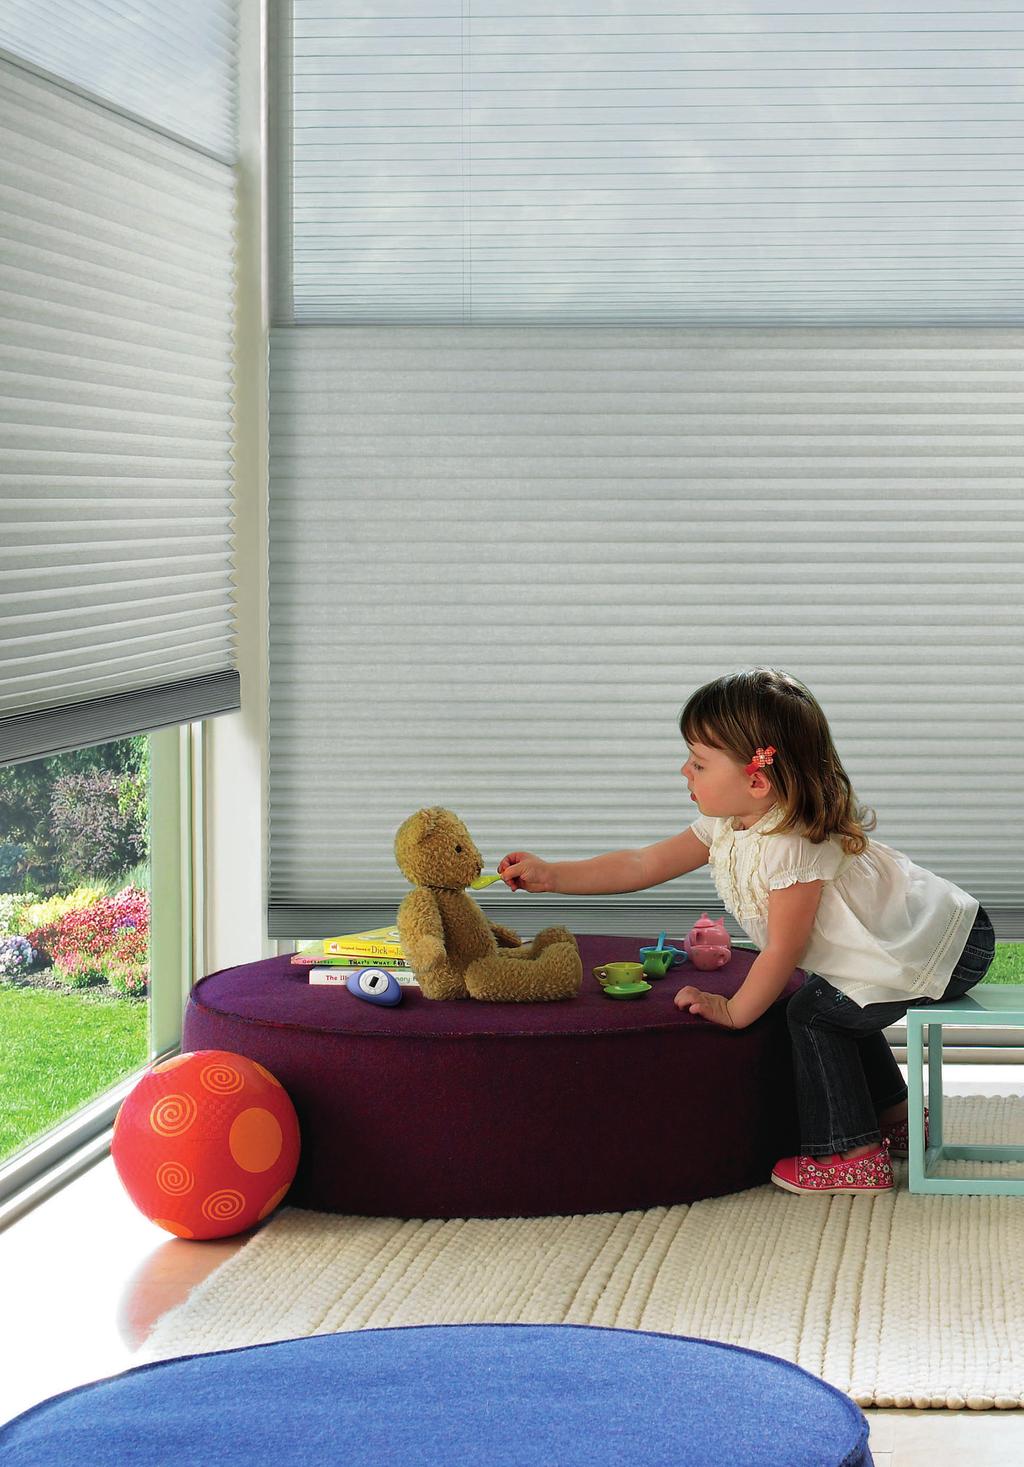 DESIGNED WITH SAFETY IN MIND Children are innately curious about the world around them. So, even basic household items like window fashions can turn into potential hazards for them.